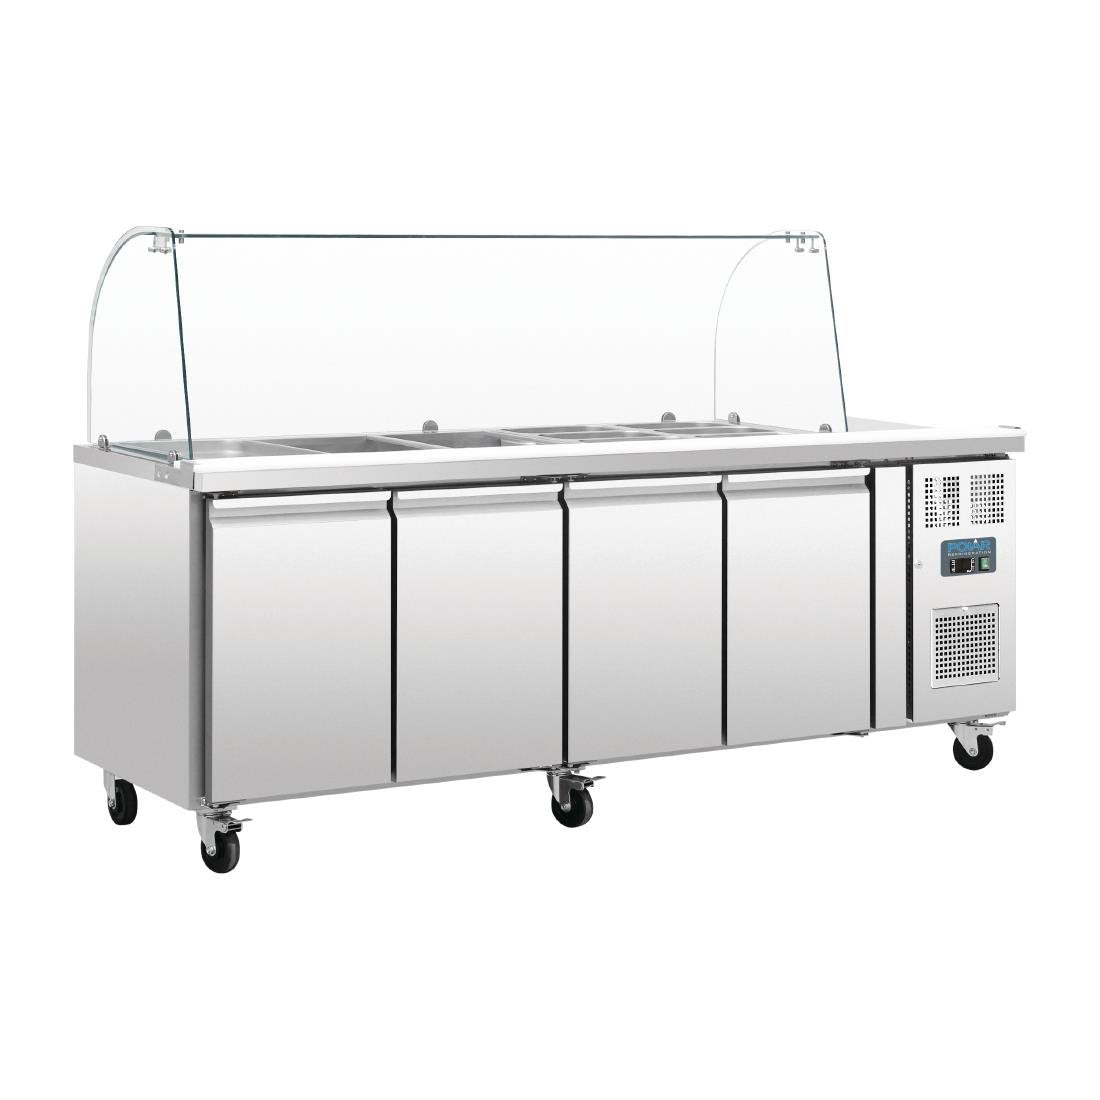 CT395 Polar U-Series Four Door Refrigerated Gastronorm Saladette Counter CT395